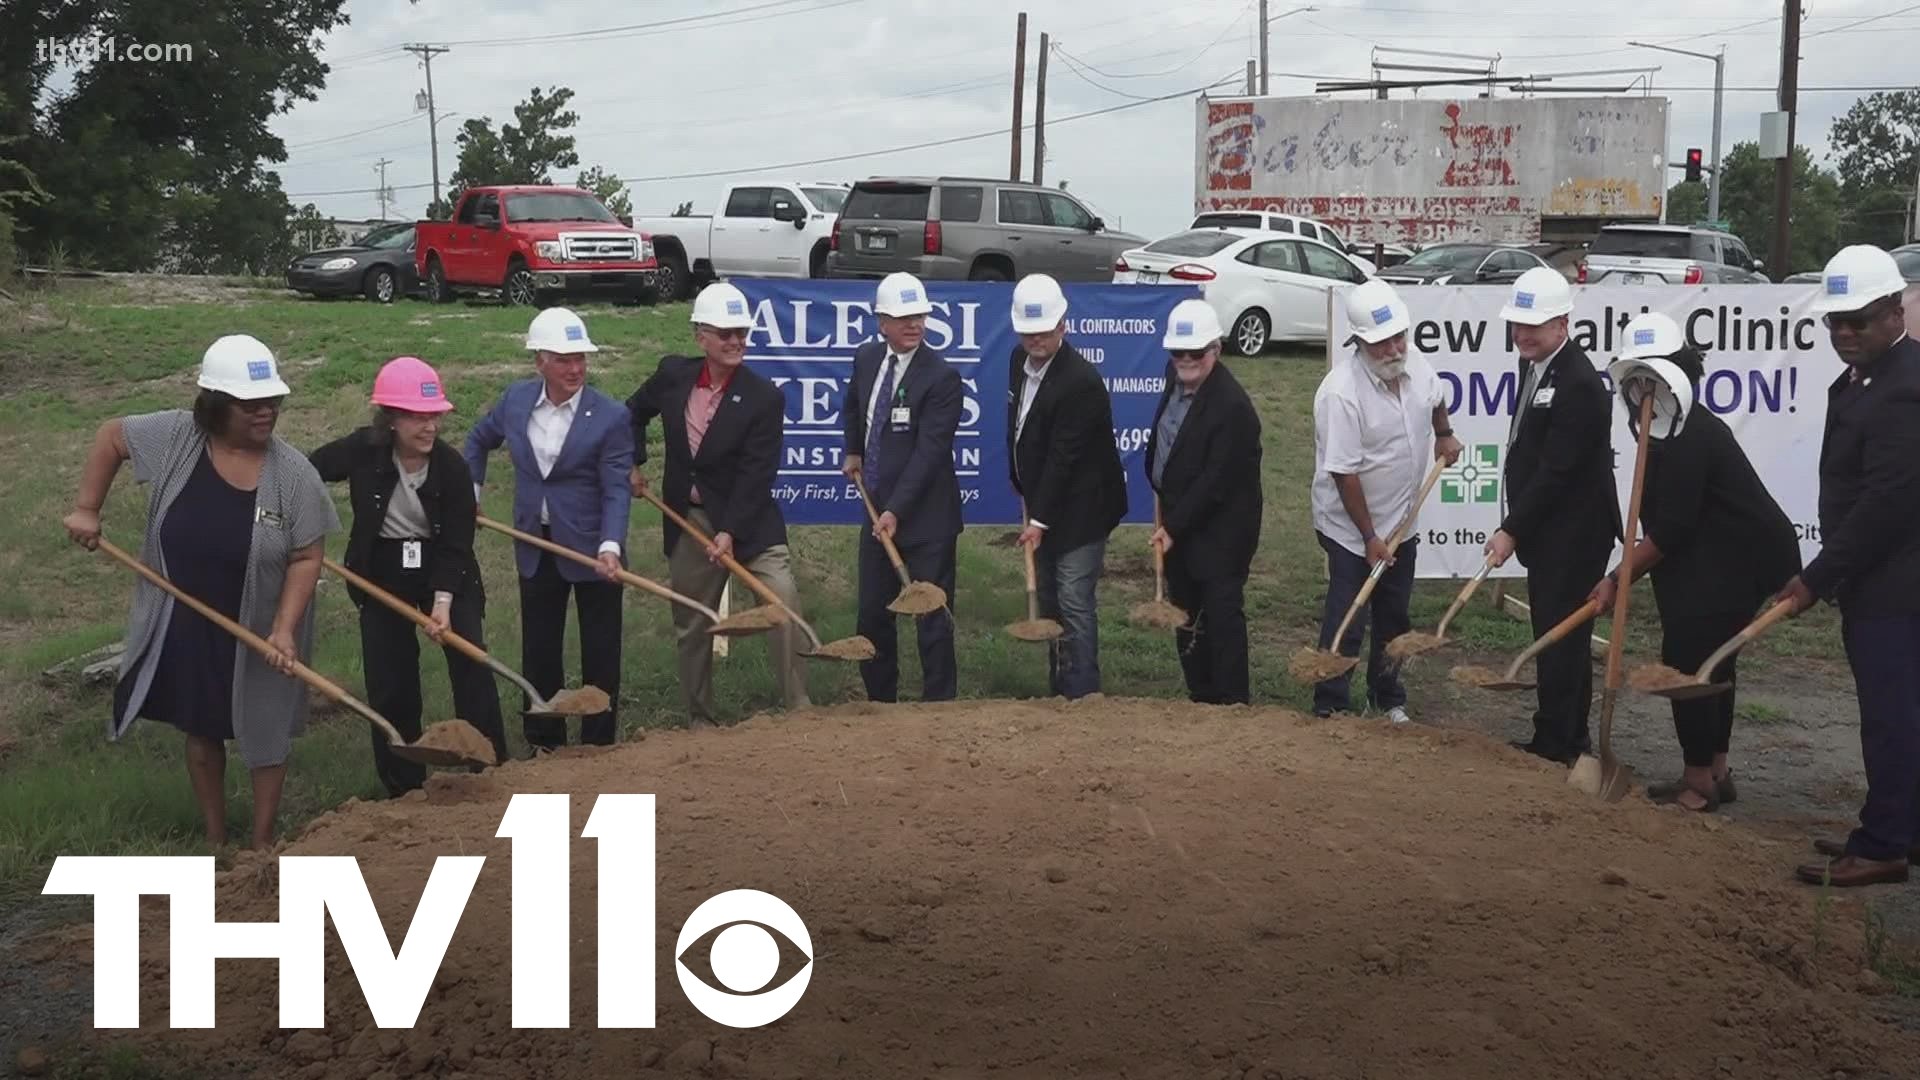 North Little Rock will soon get its first full-service health clinic in the city's east side since 2013. It is expected to be complete by late 2023 or early 2024.